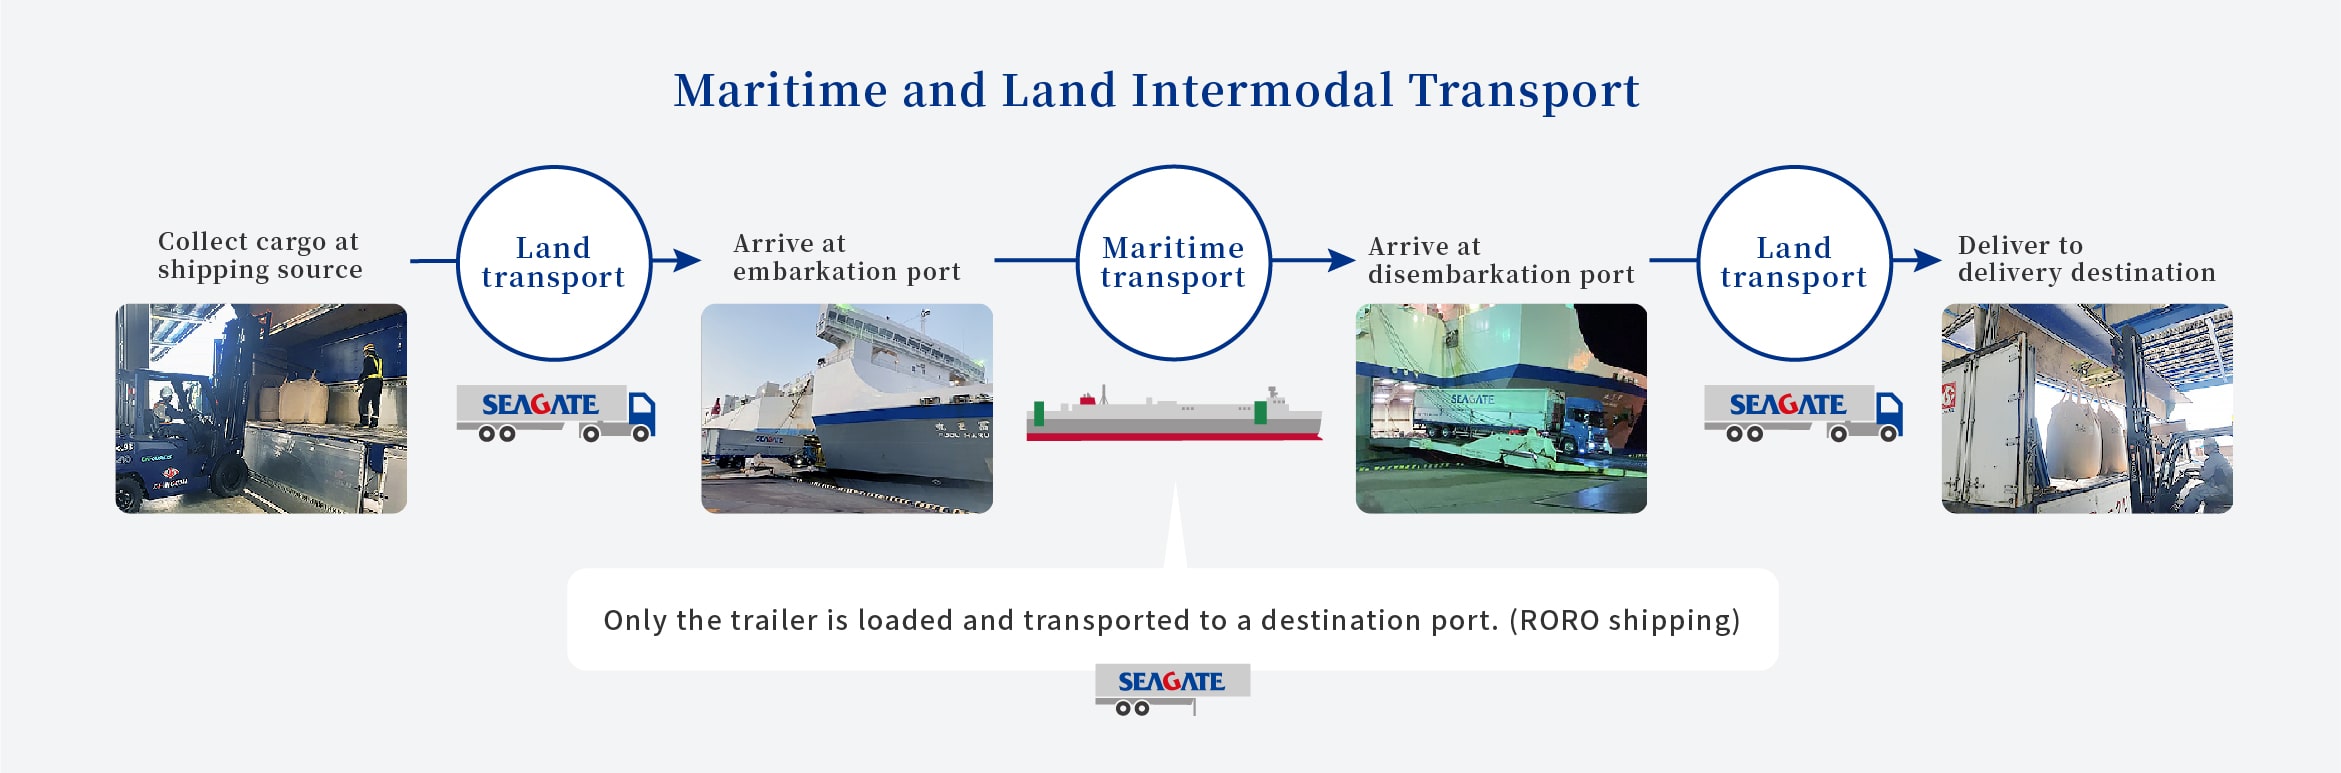 Structure of Integrated Maritime and Land Transport